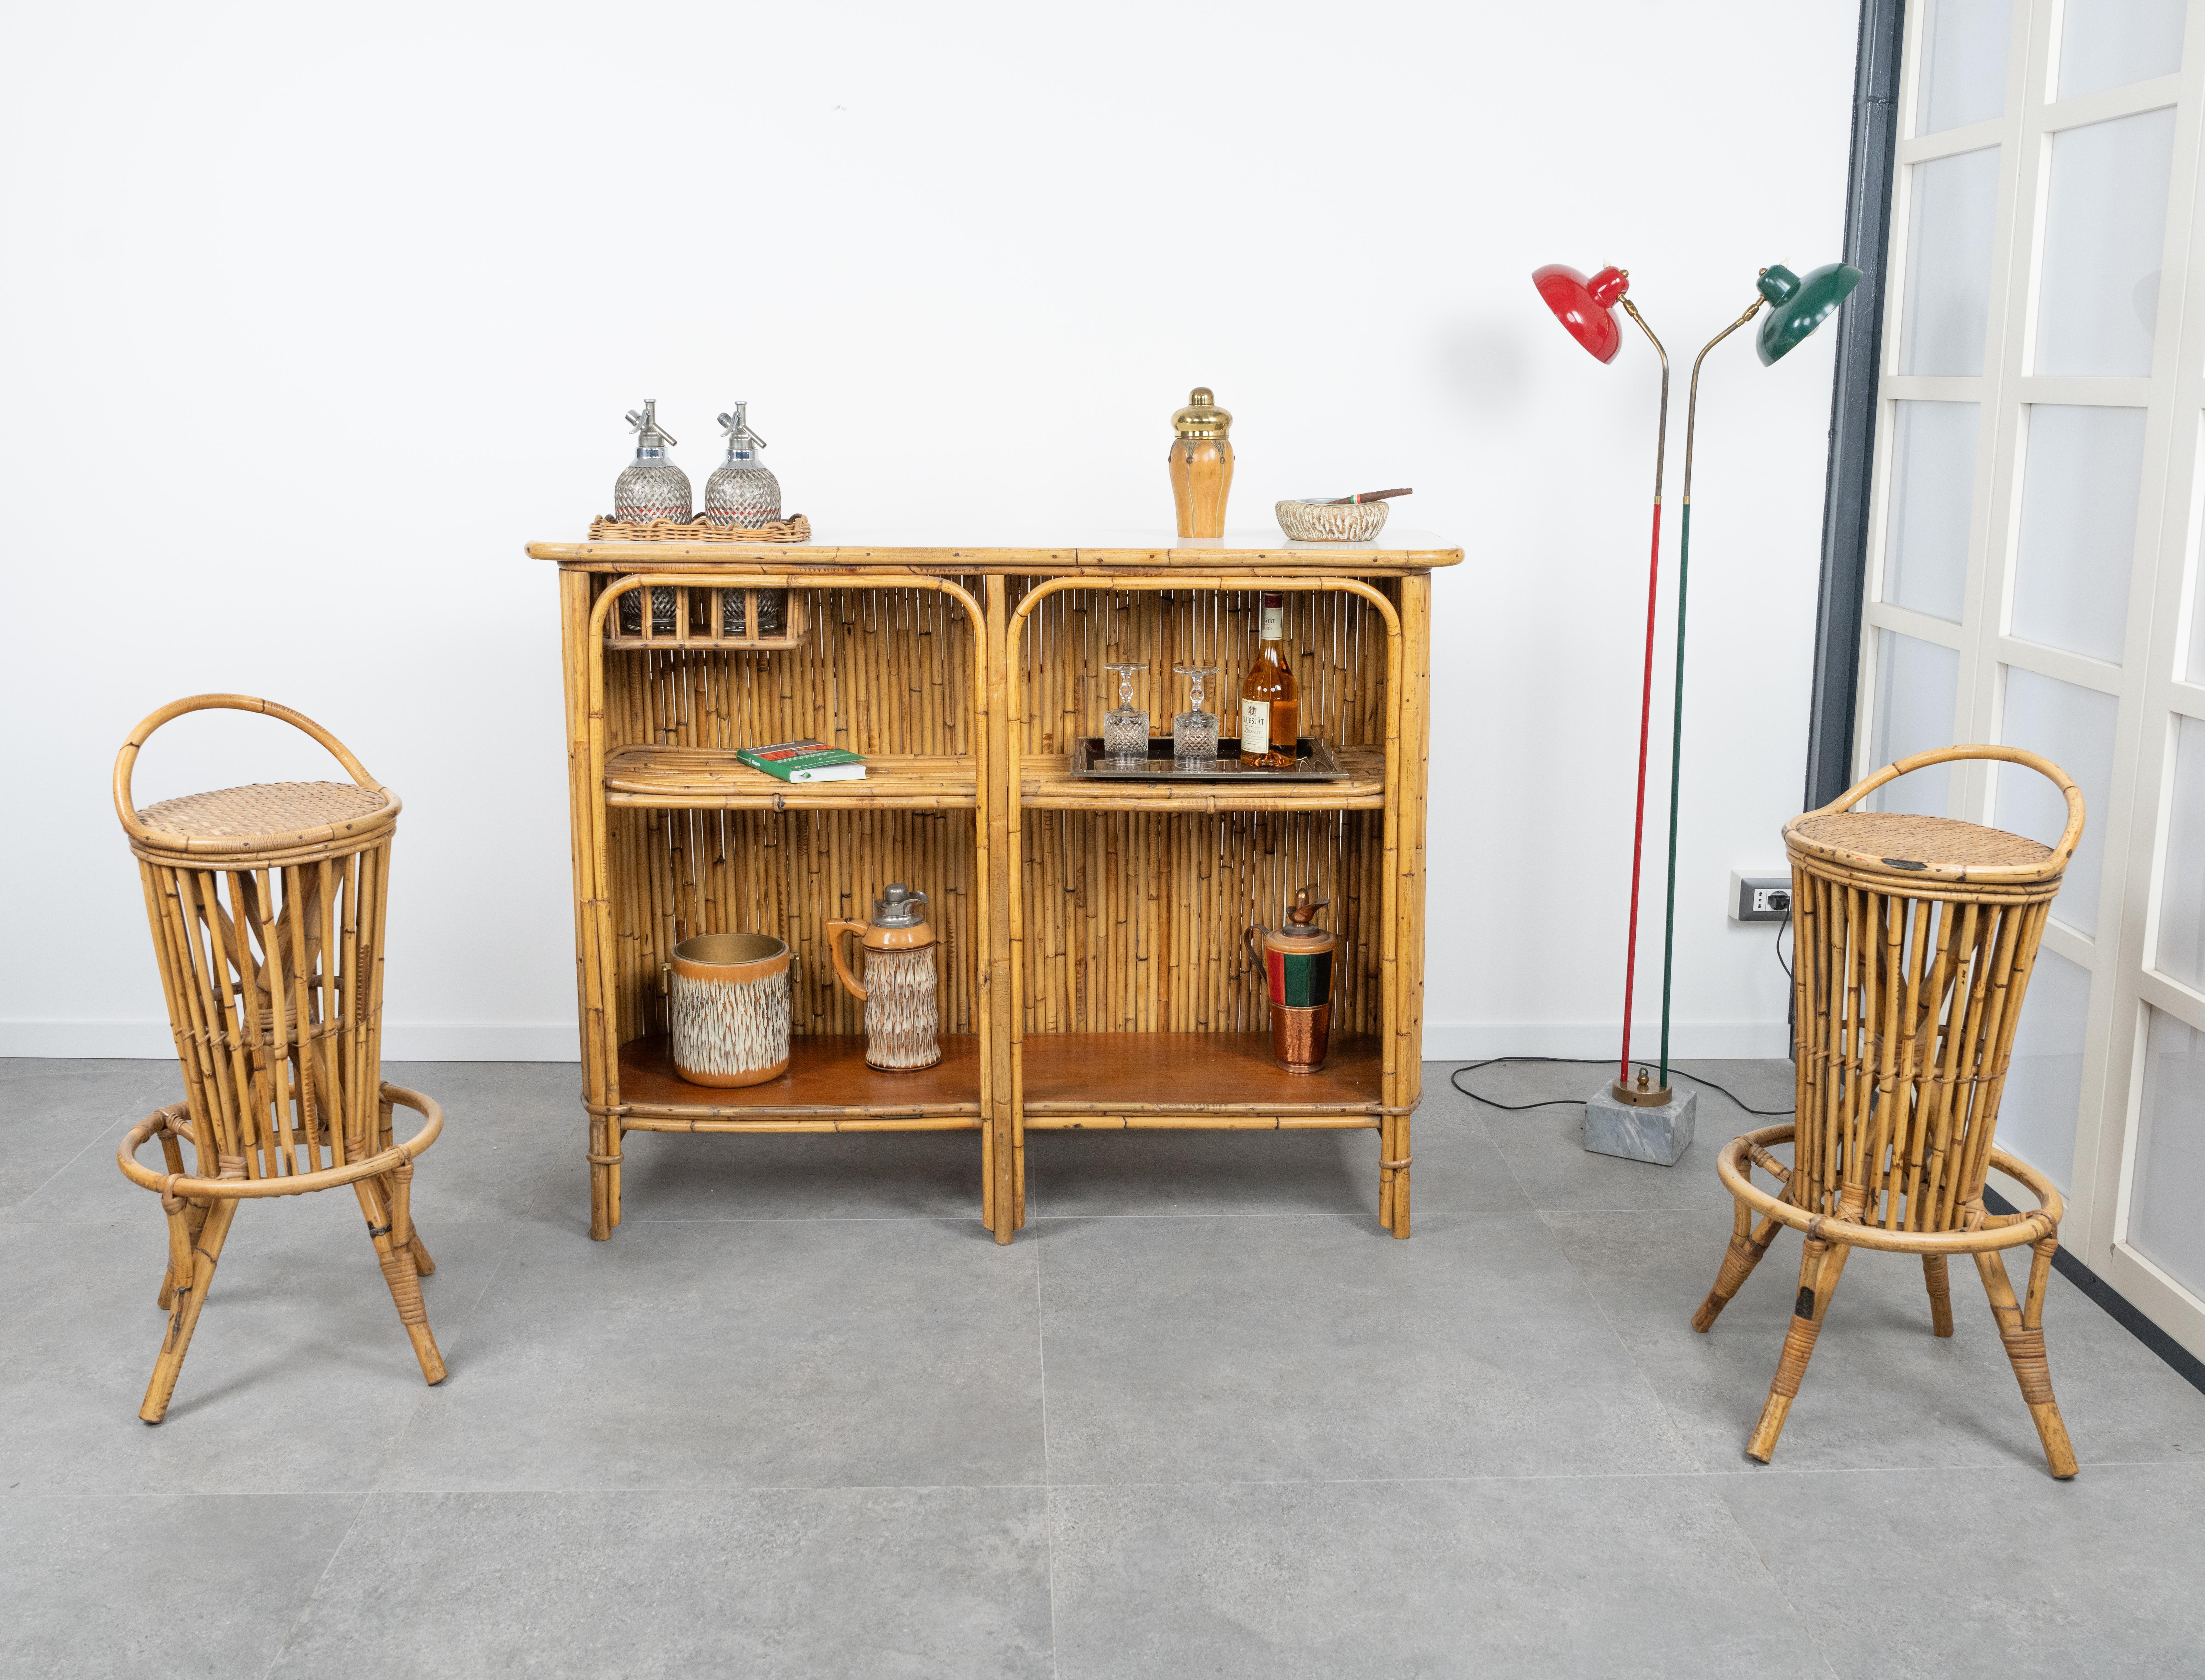 Bamboo and Rattan Cabinet Bar with Two Stools by Tito Agnoli, Italy 1950s For Sale 1